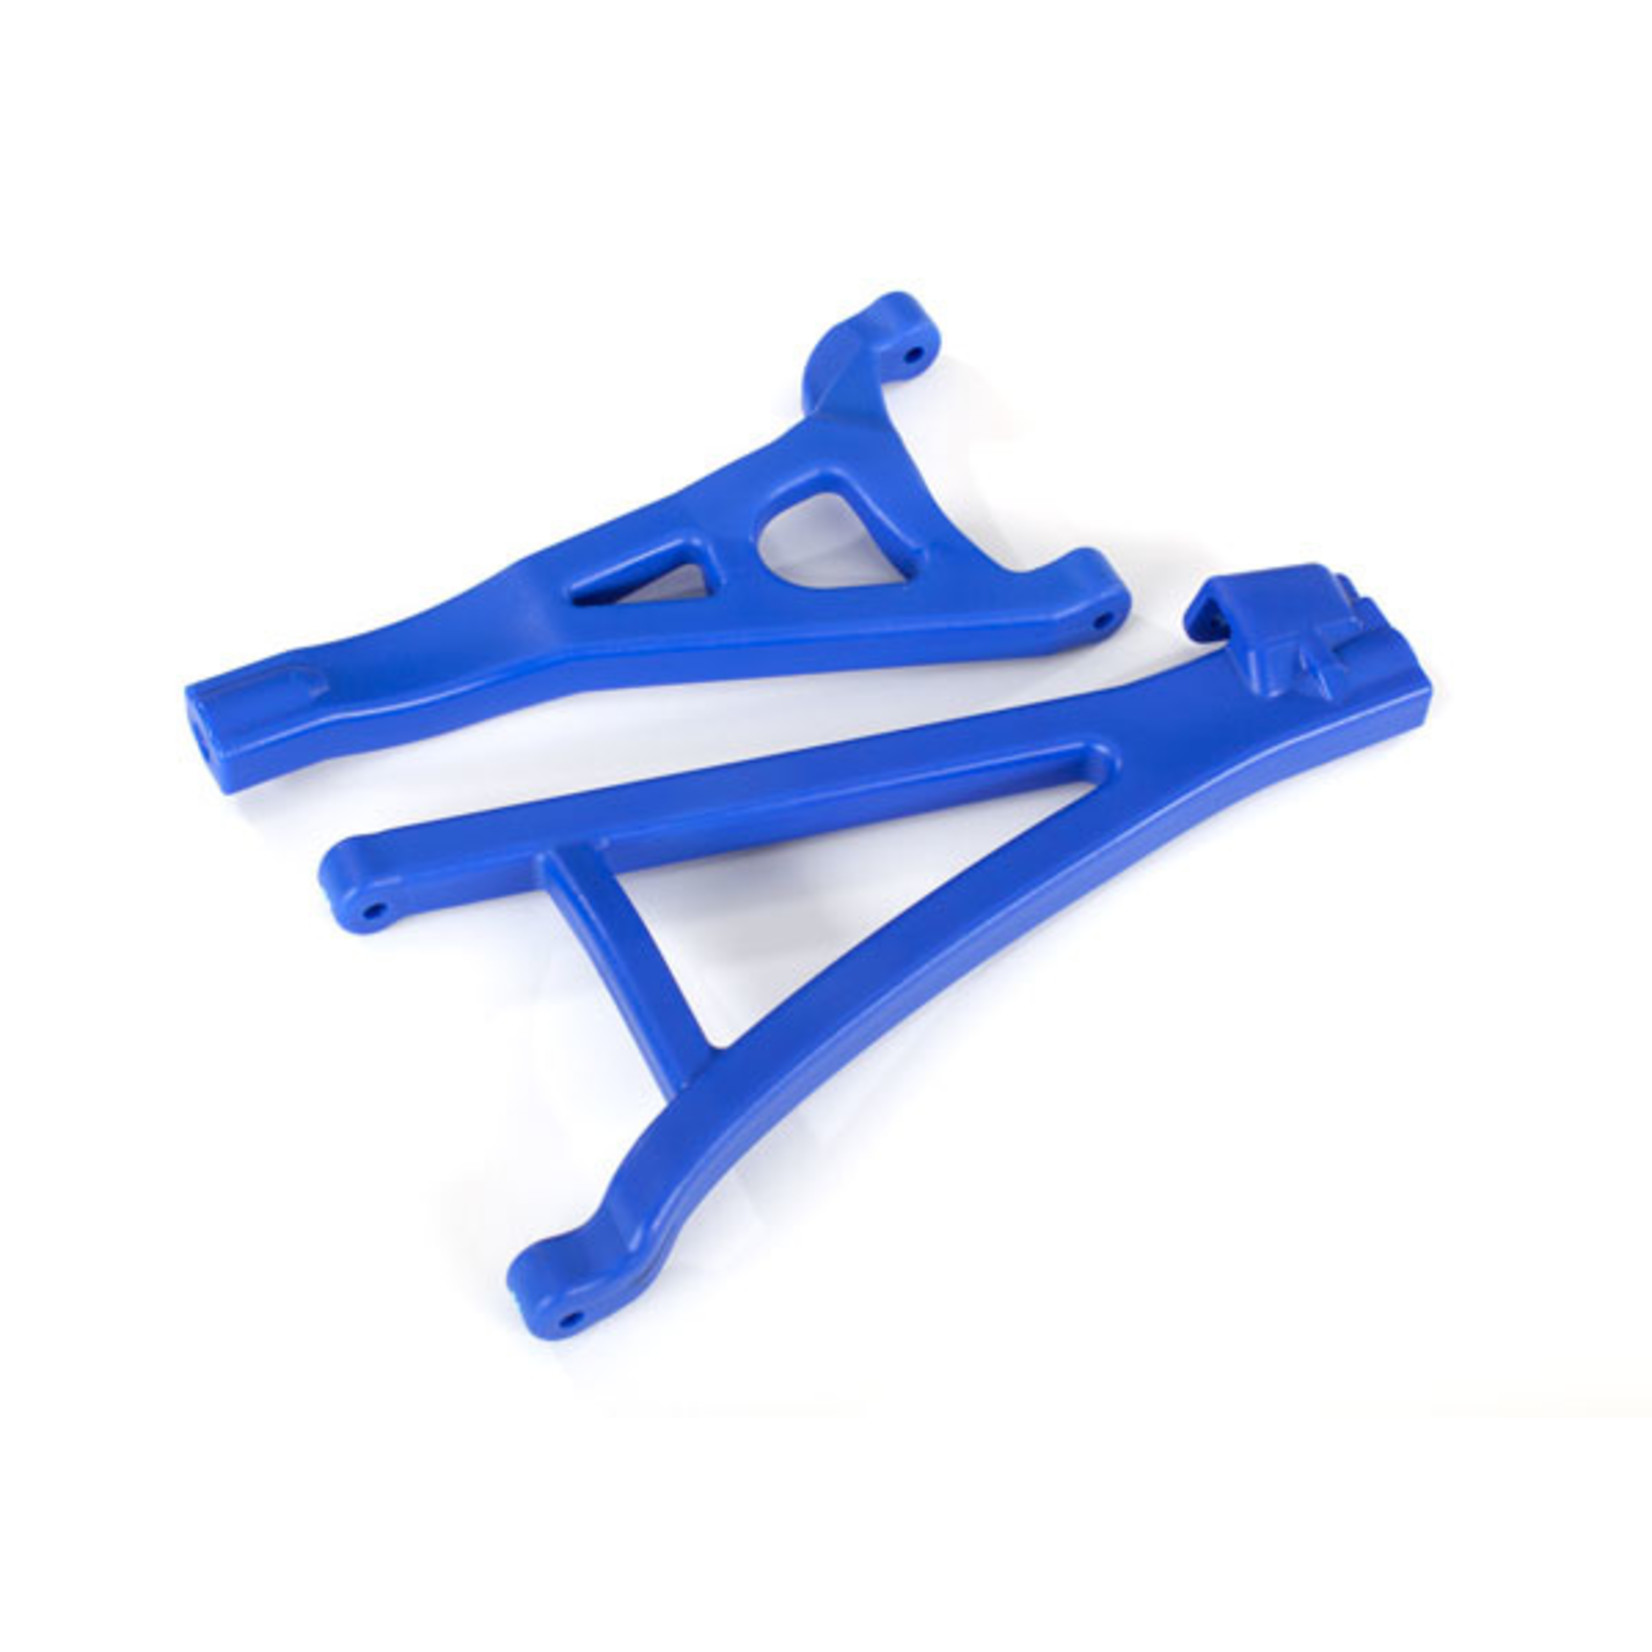 Traxxas 8632X - Suspension arms, blue, front (left), heavy